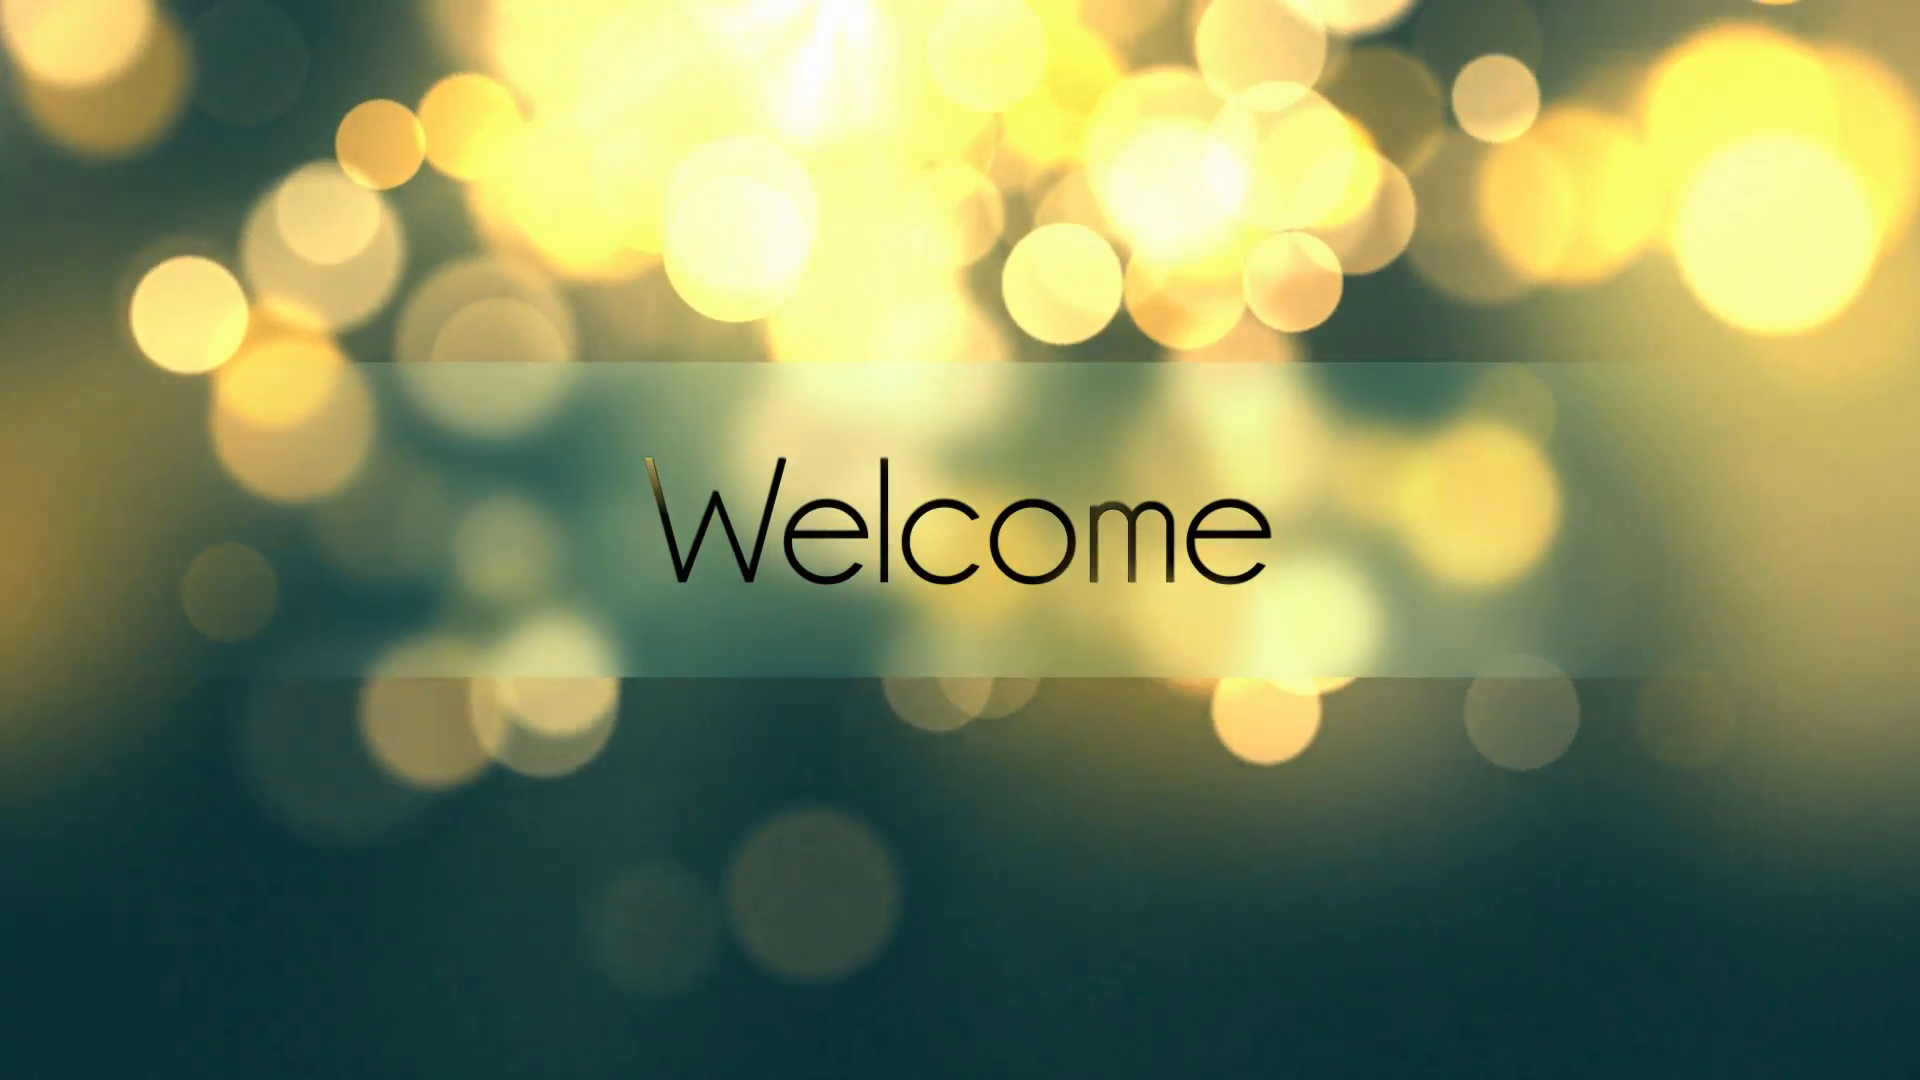 photo welcom - welcome images free